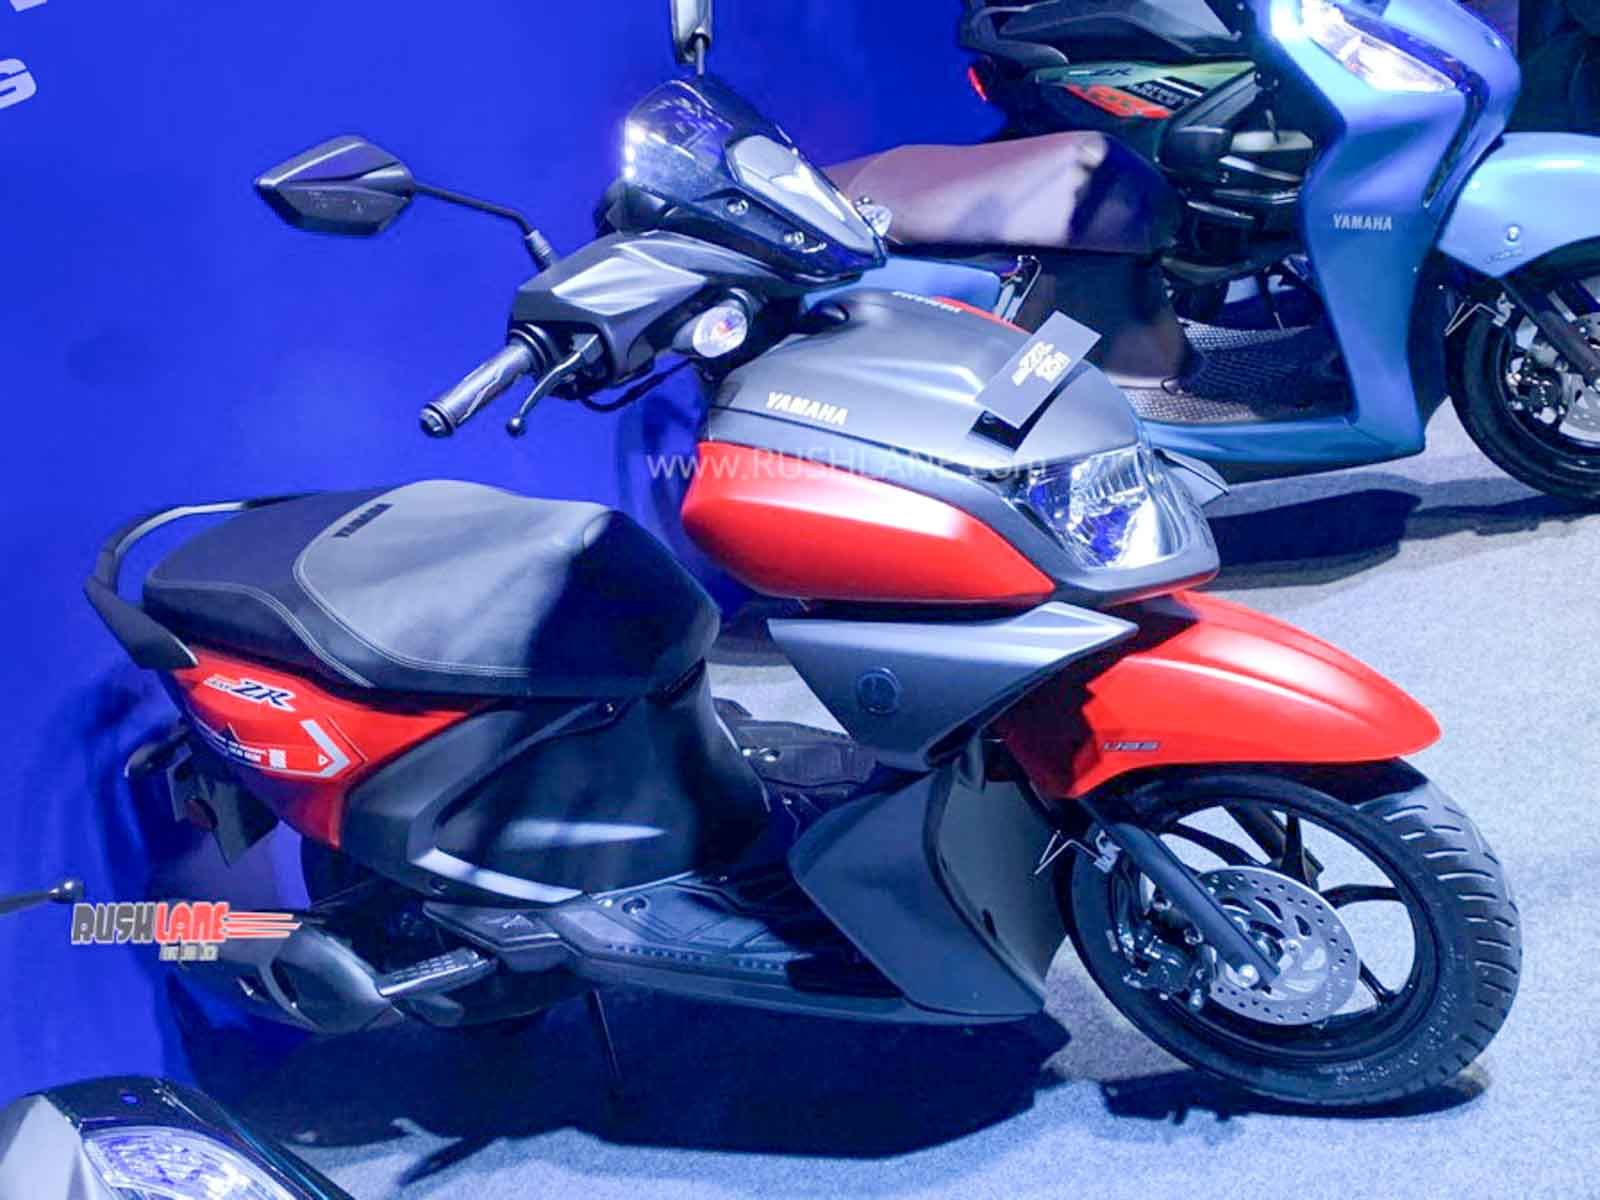 2020 Yamaha Ray Zr Bs6 Scooter Debuts With 125cc Fi Engine